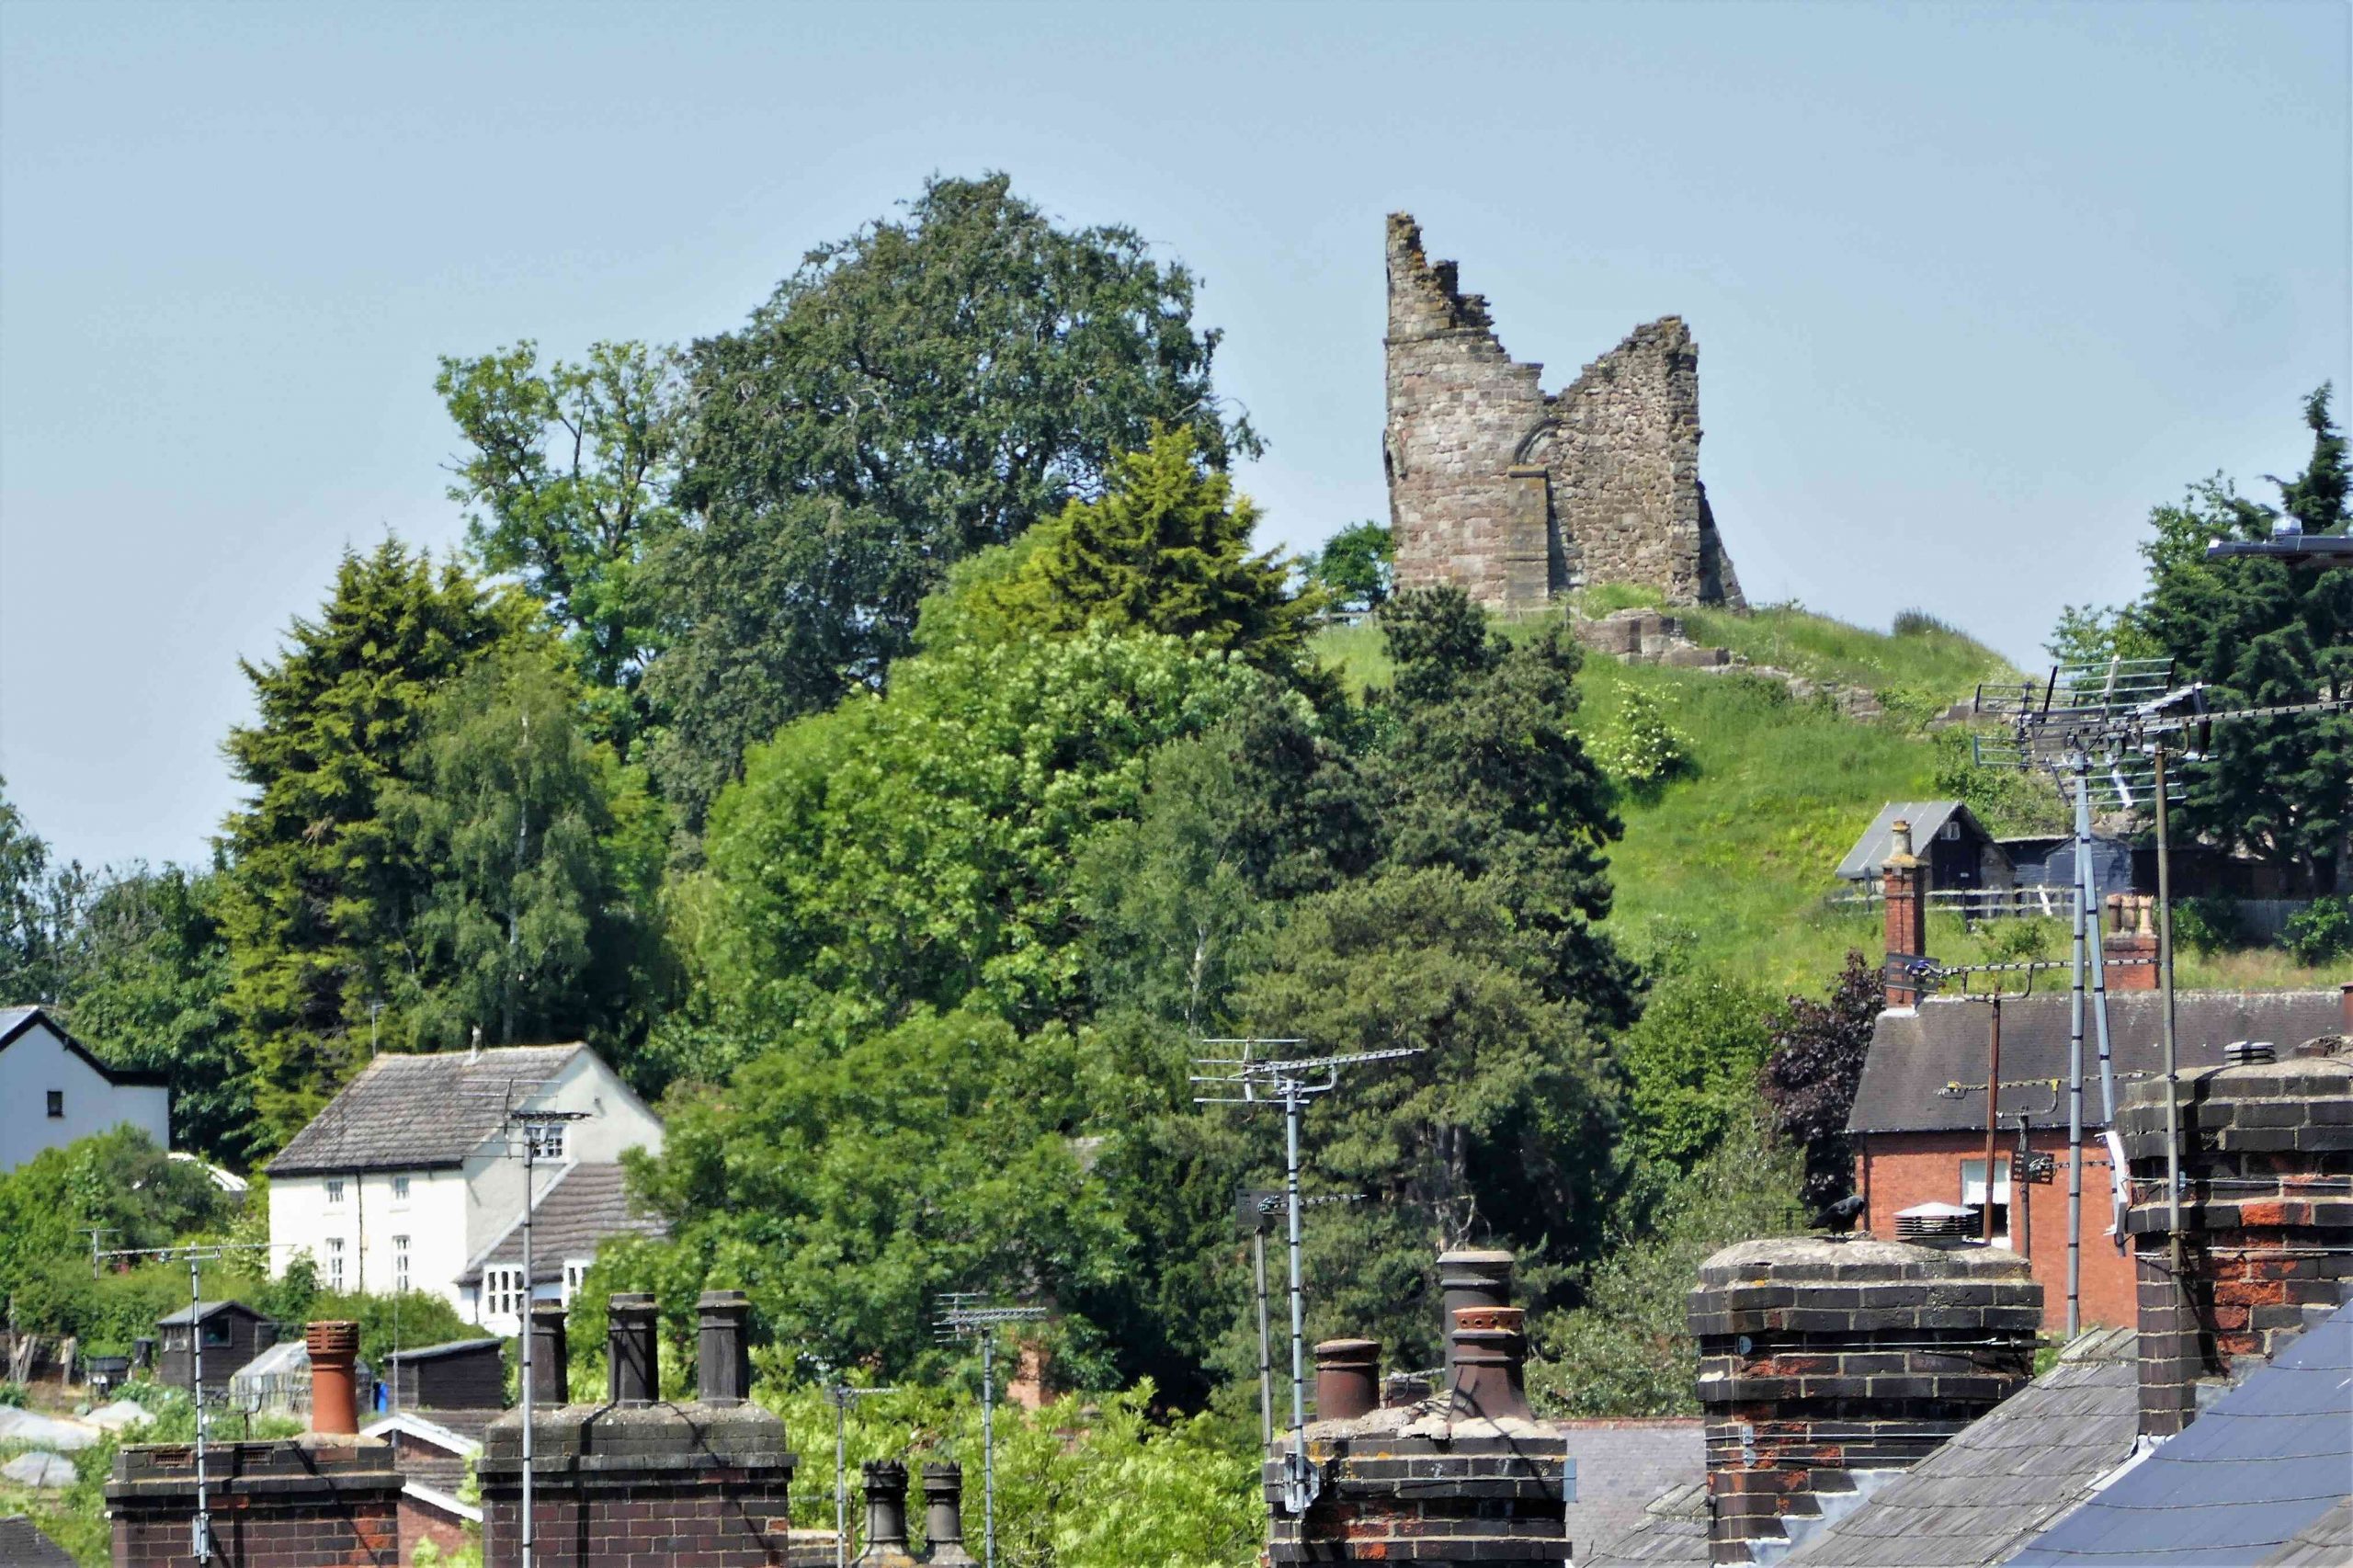 For a few years Anne Moore rivalled Tutbury castle as the town's main attraction